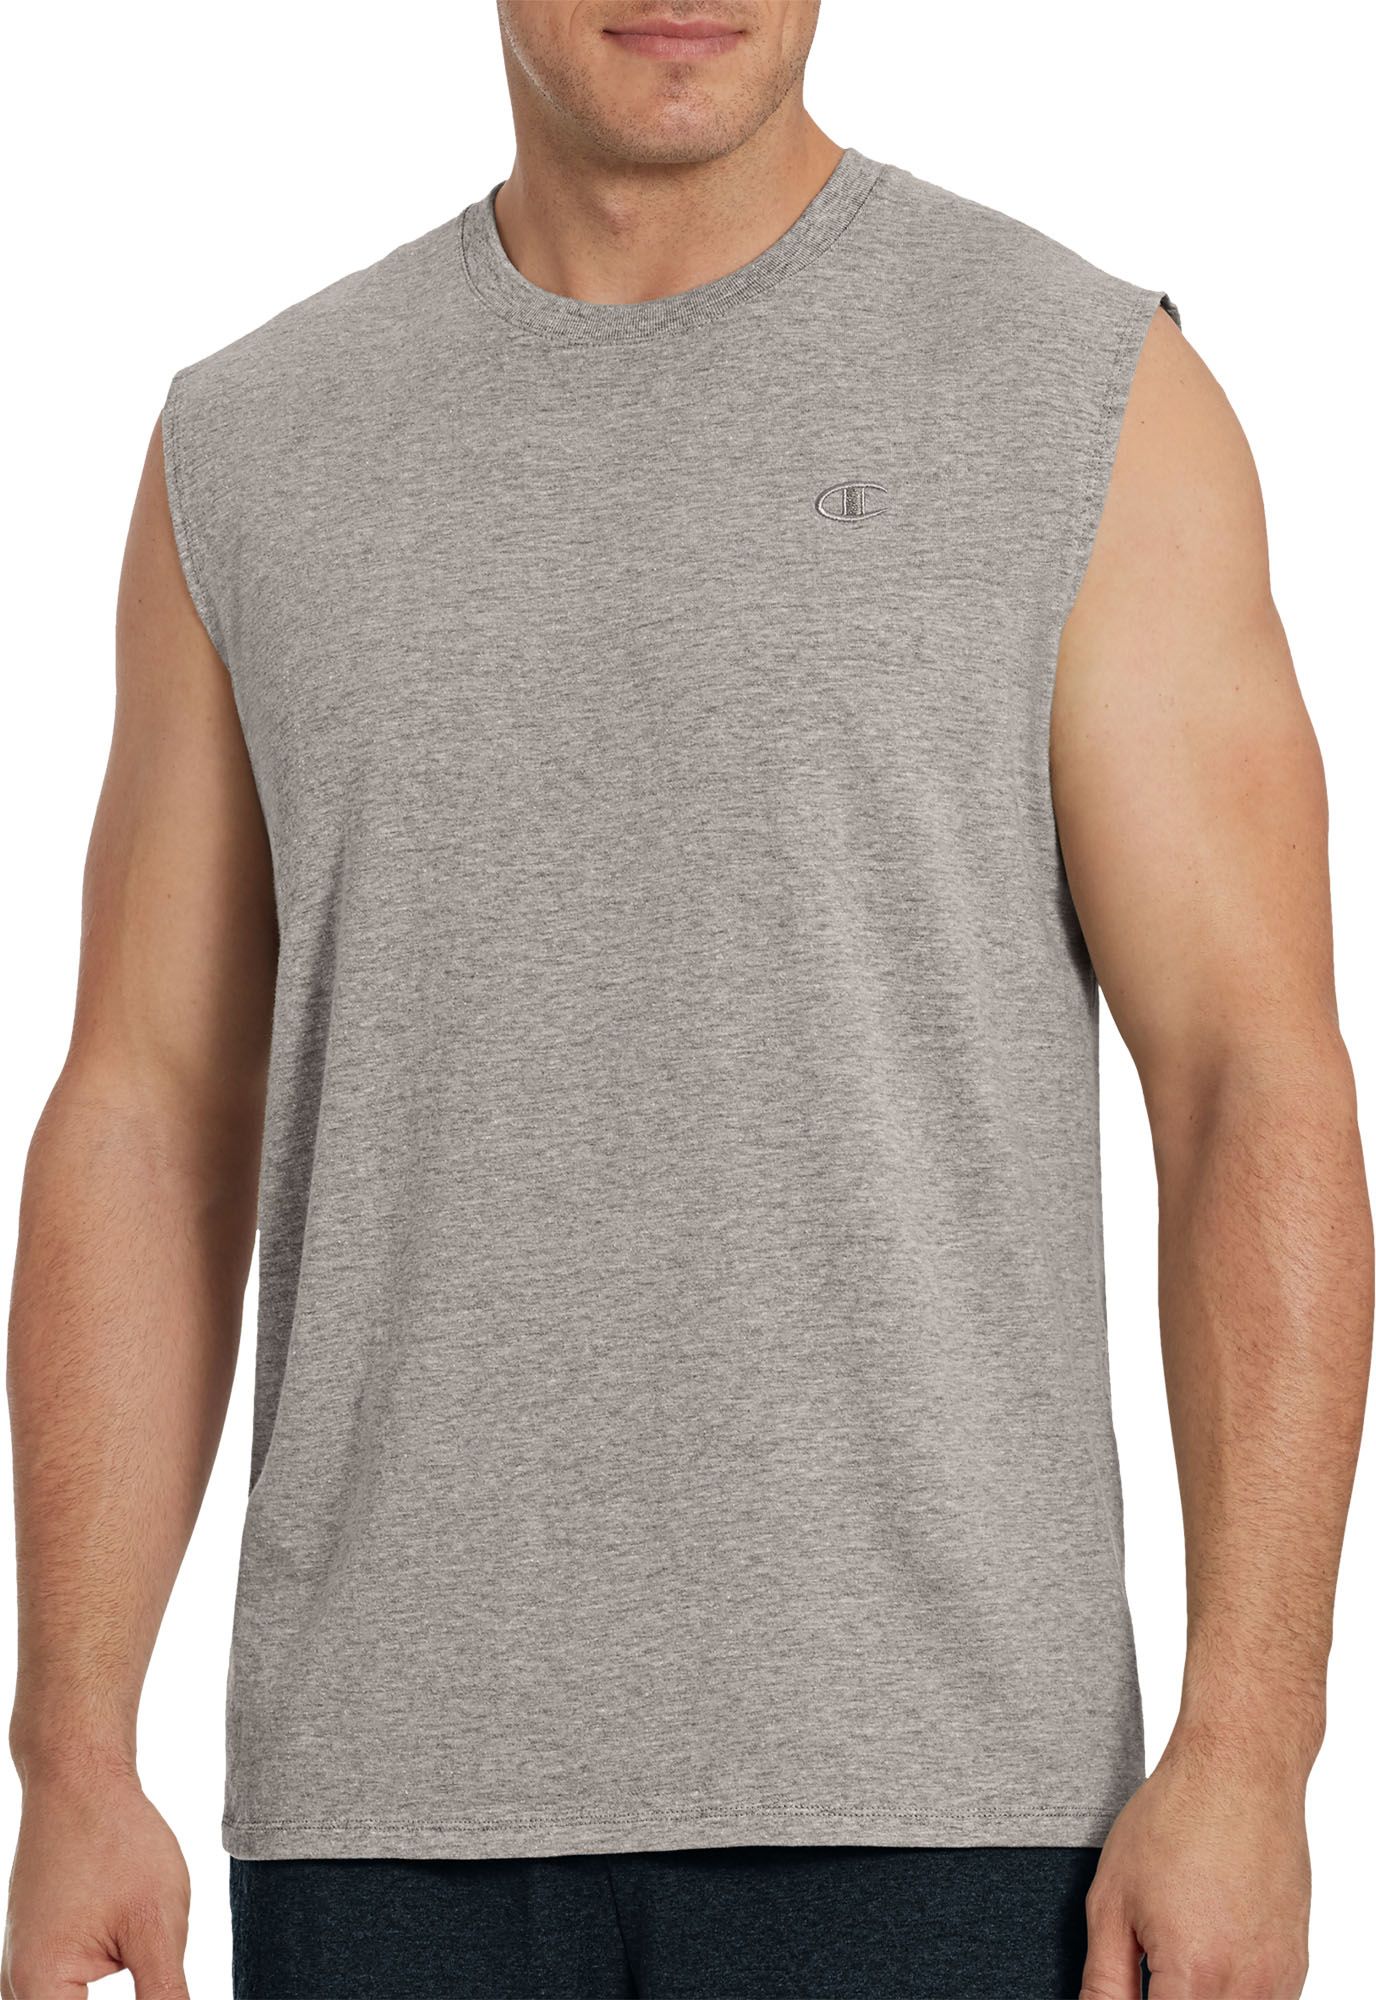 champion men's classic cotton muscle tee